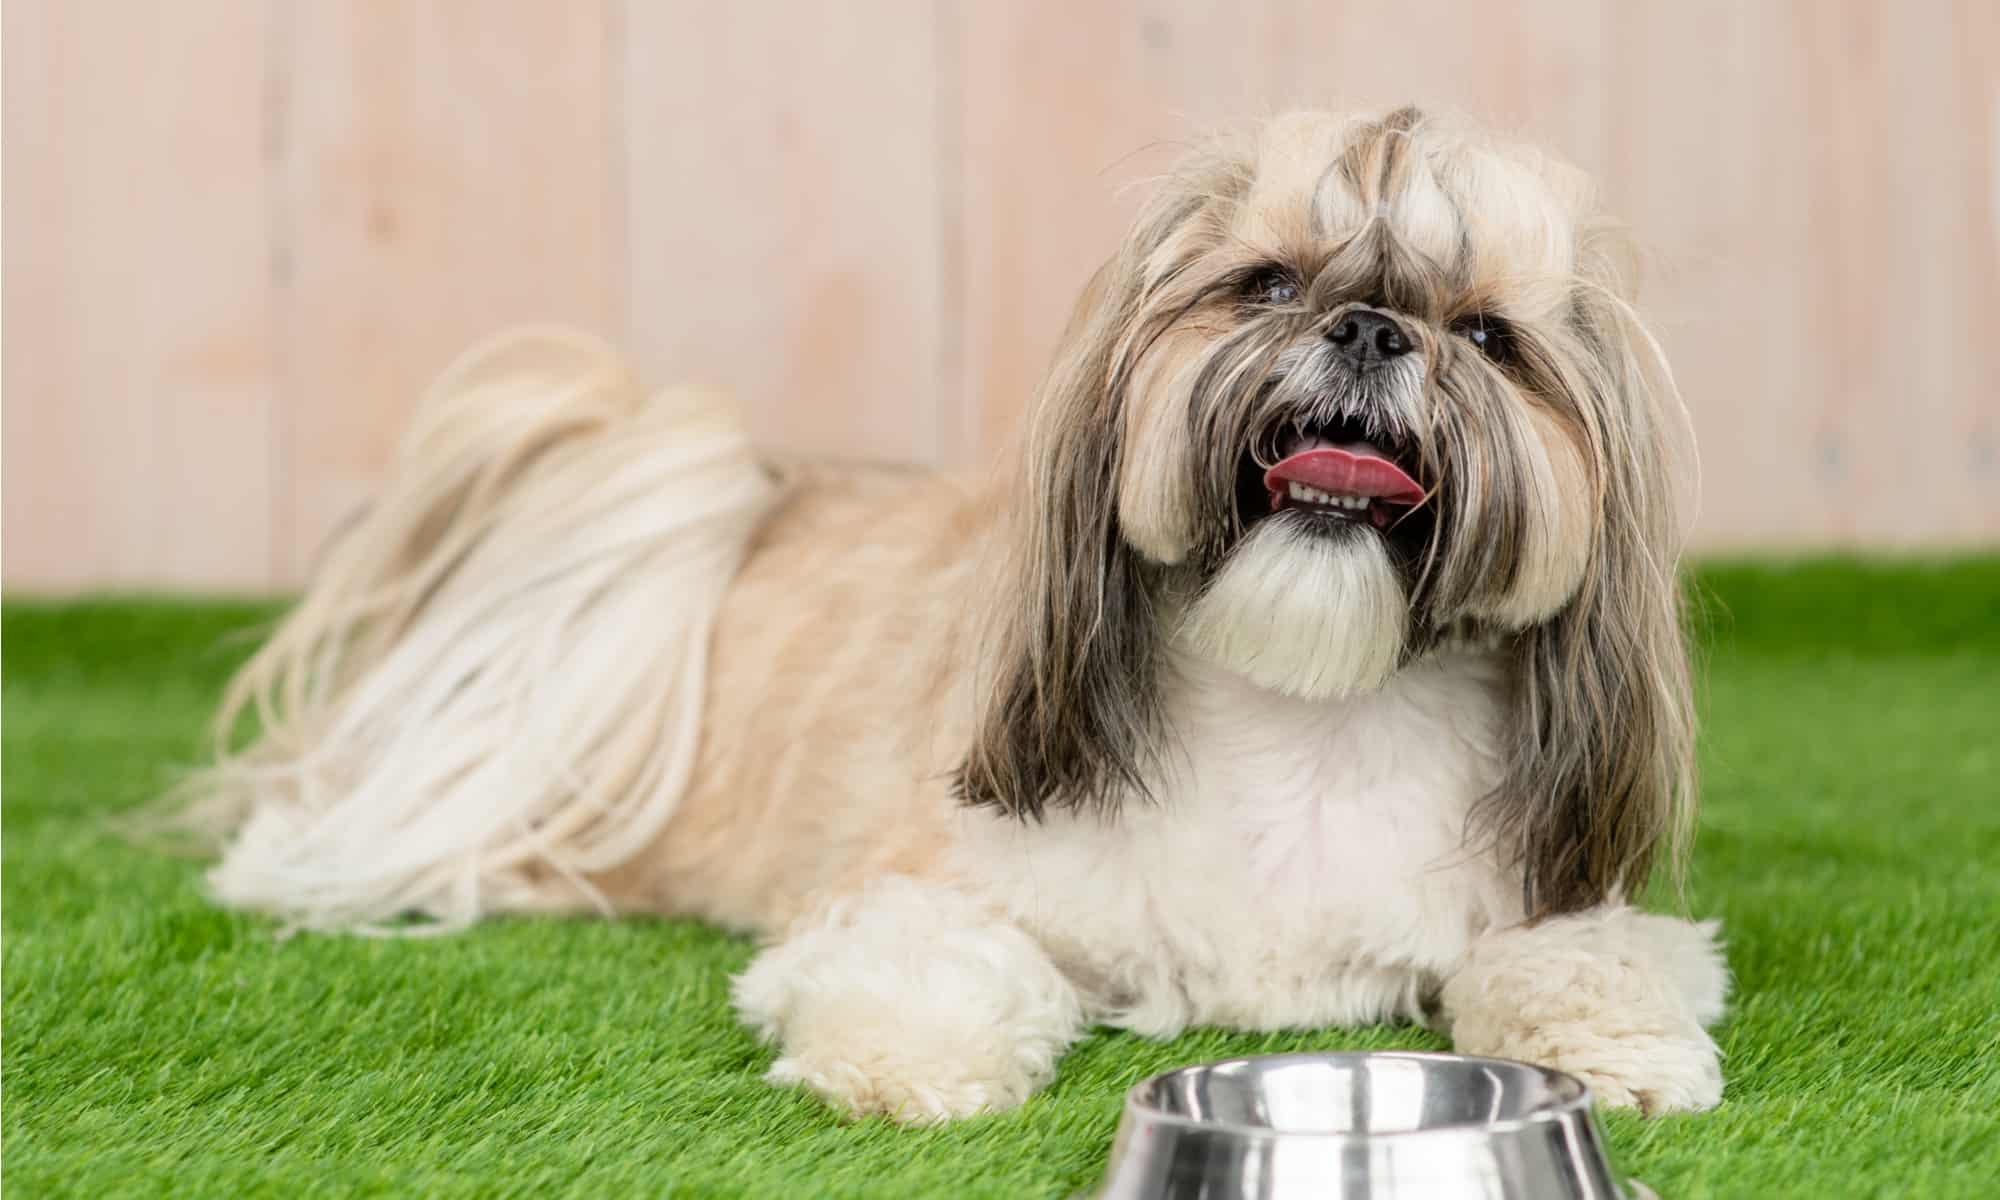 What Are Shih Tzus Allergic To In Dog Food